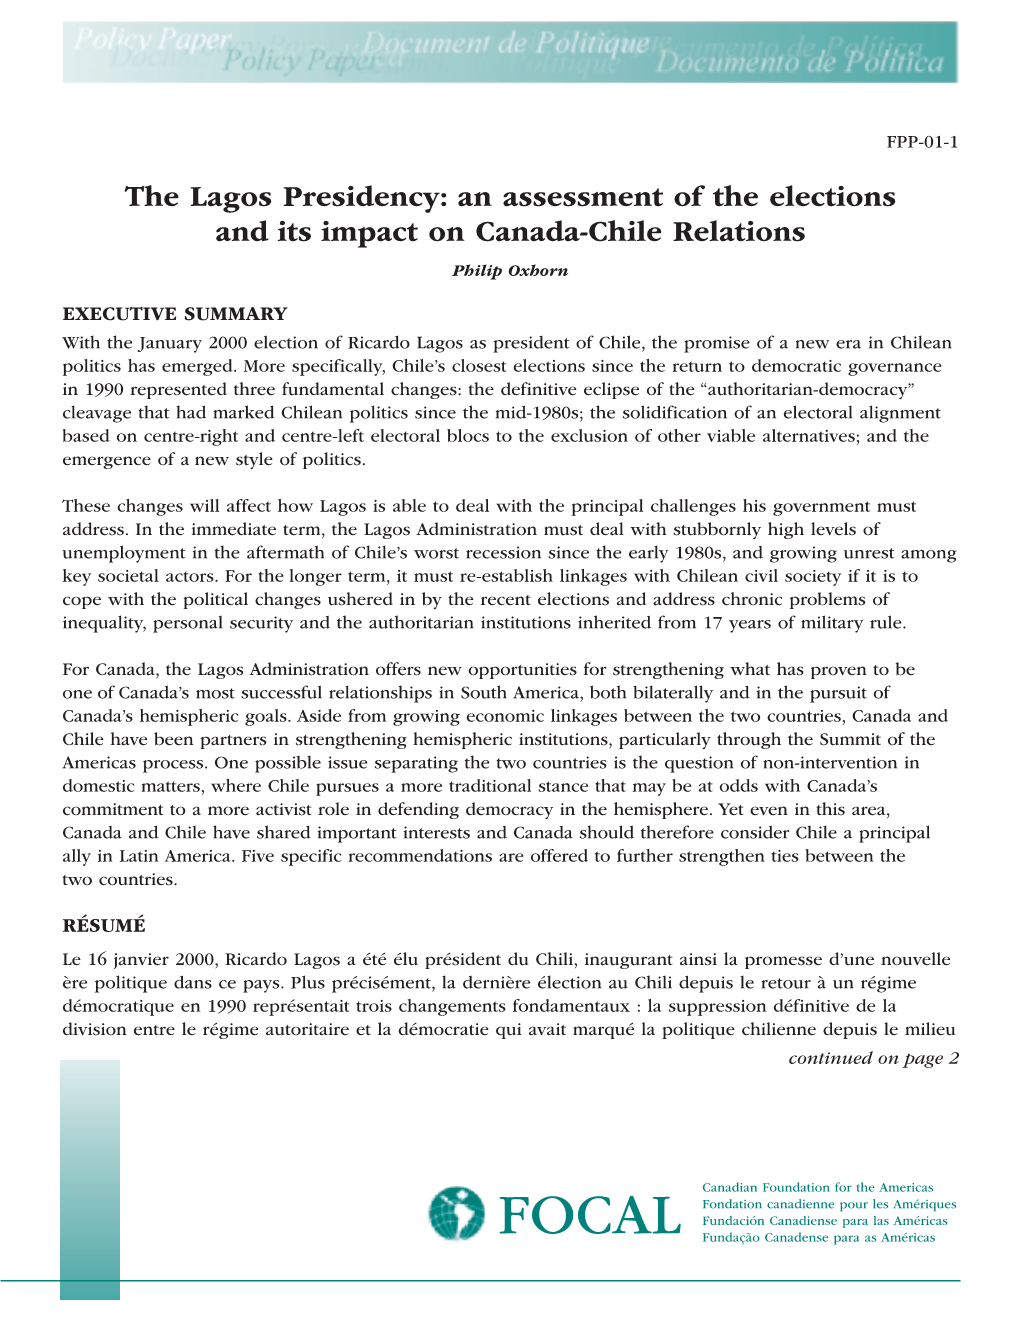 The Lagos Presidency: an Assessment of the Elections and Its Impact on Canada-Chile Relations Philip Oxhorn